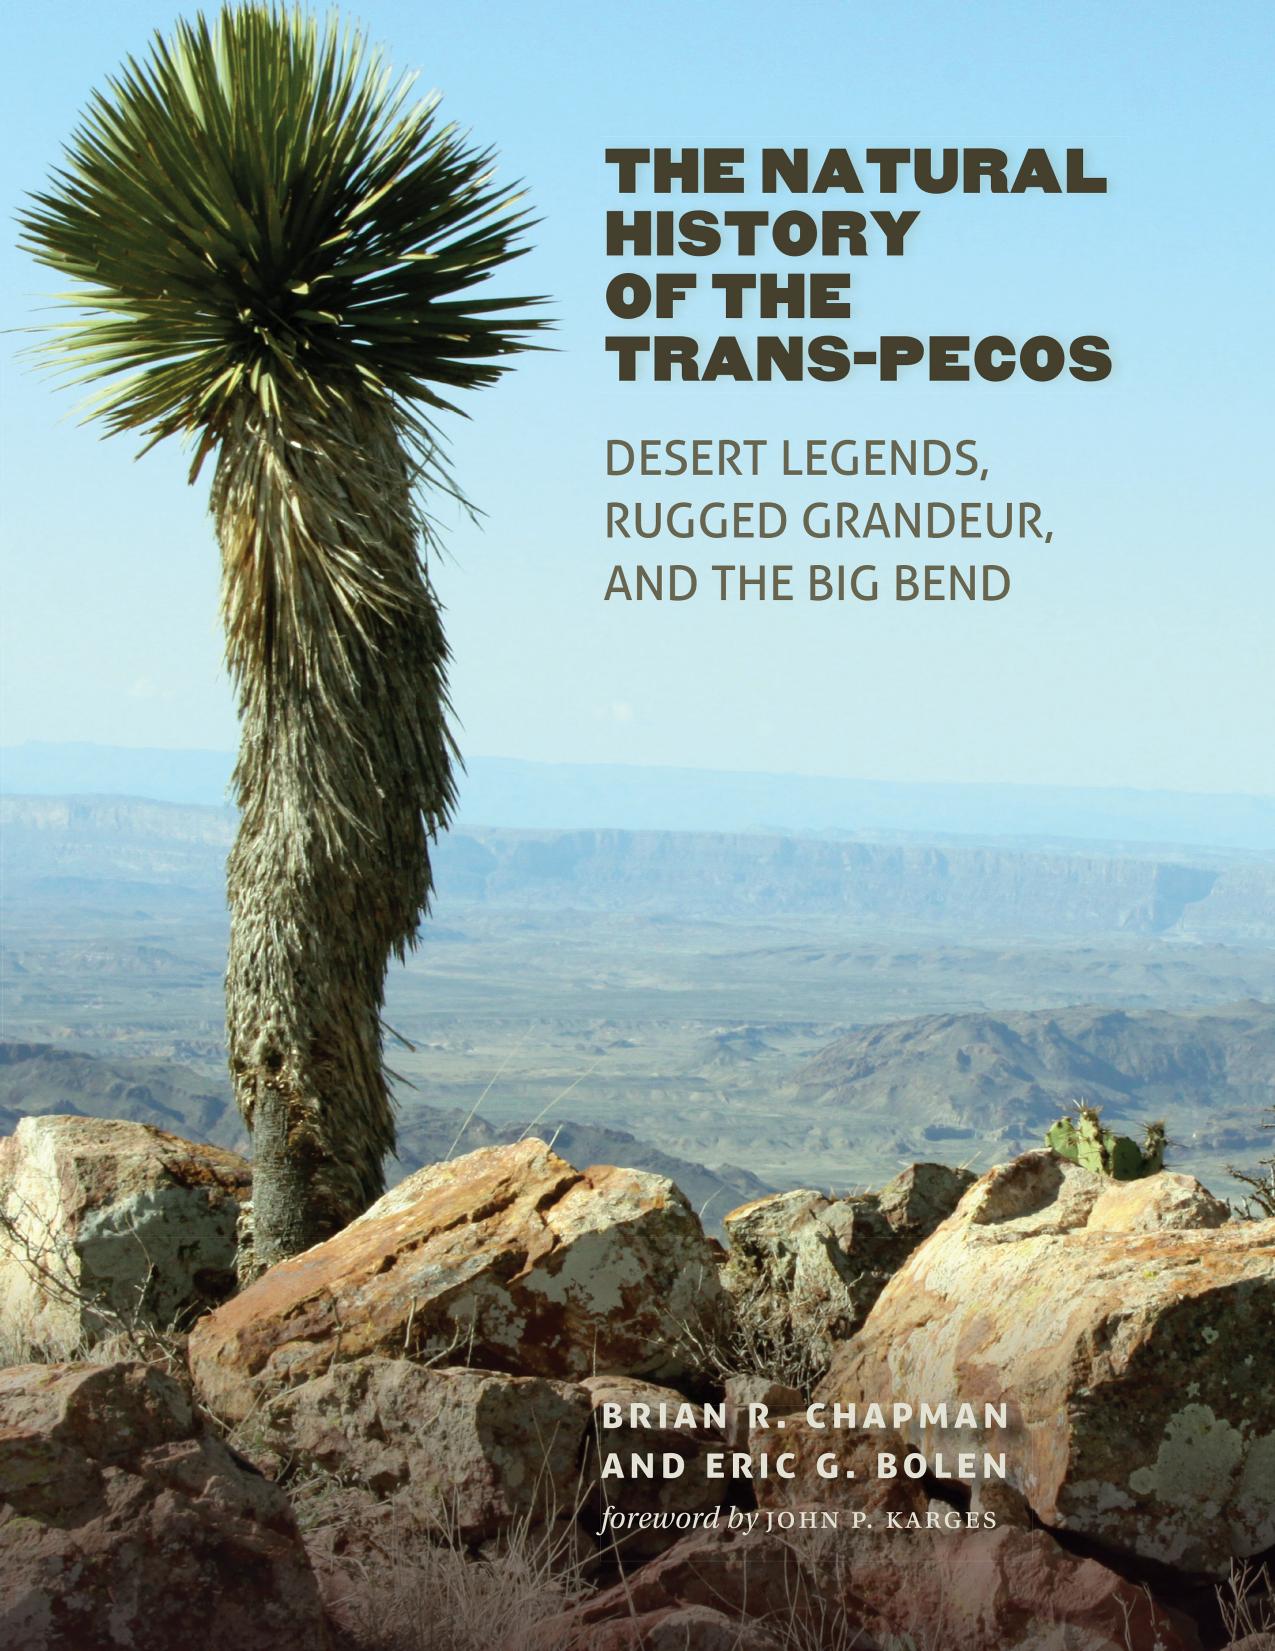 The Natural History of the Trans-Pecos: Desert Legends, Rugged Grandeur, and the Big Bend by Brian R. Chapman; Eric G. Bolen